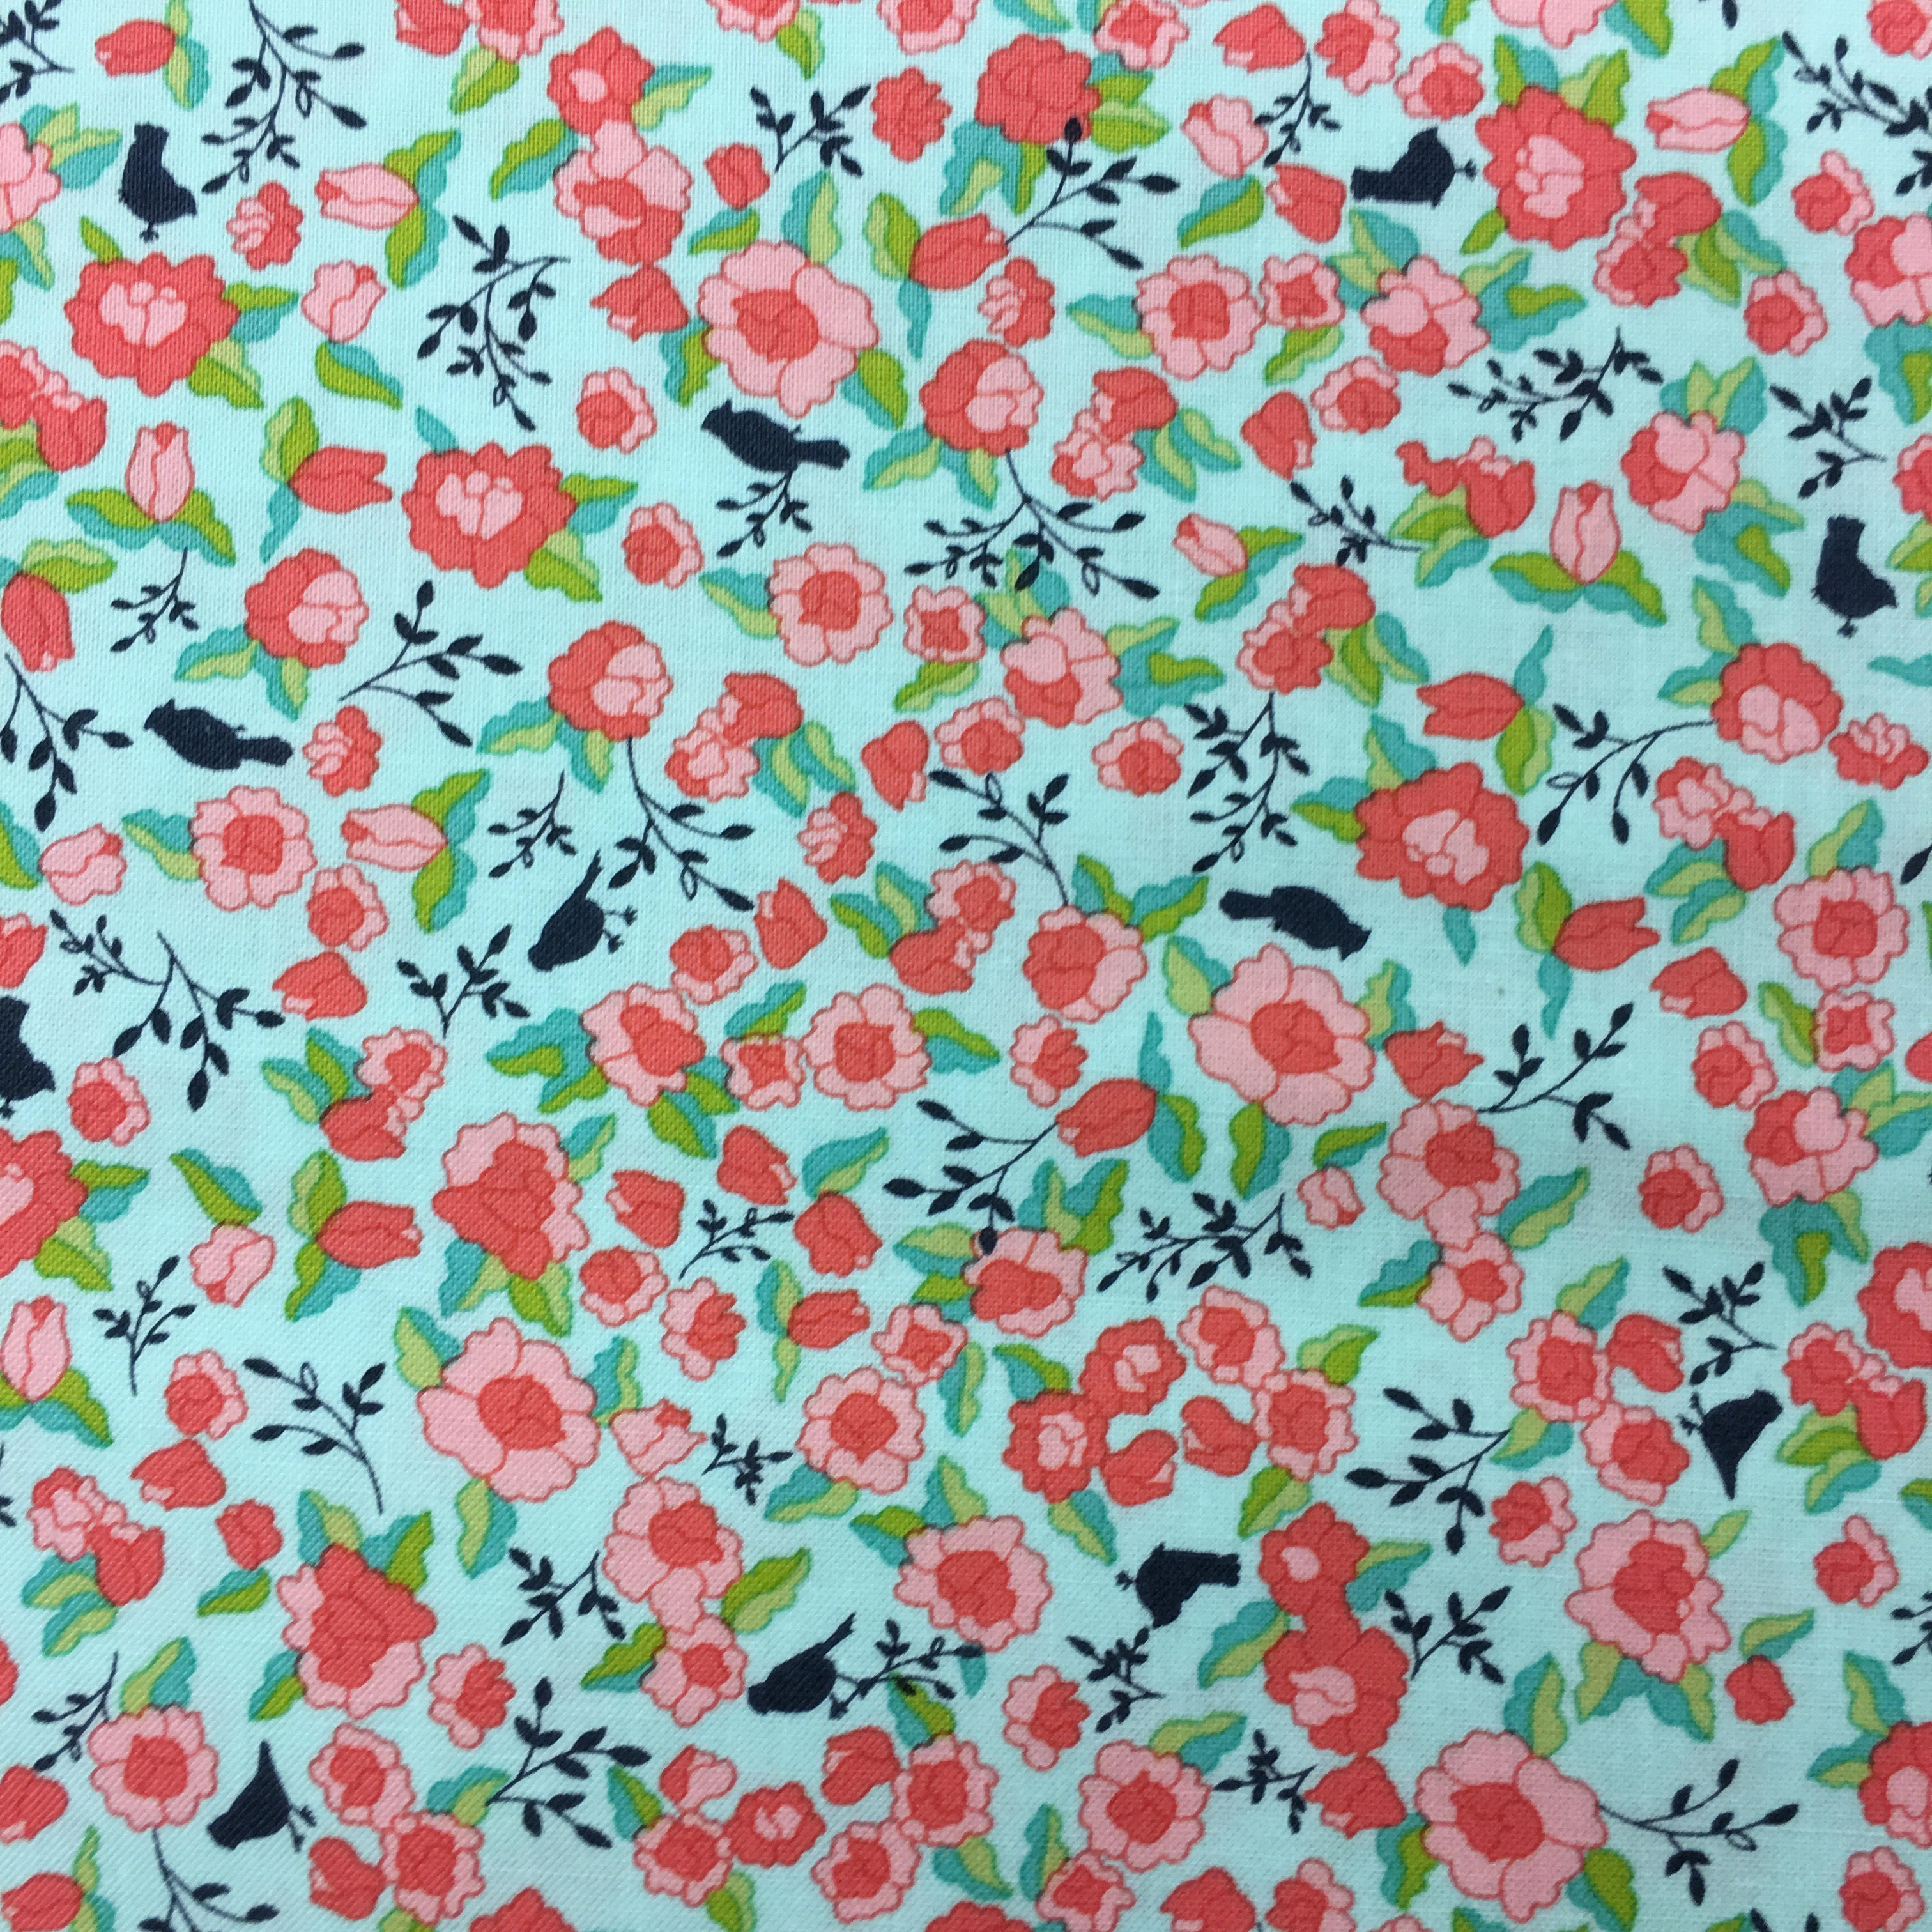 Tuppence - Green Floral Cotton Fabric - by Shannon Gillman Orr for Moda